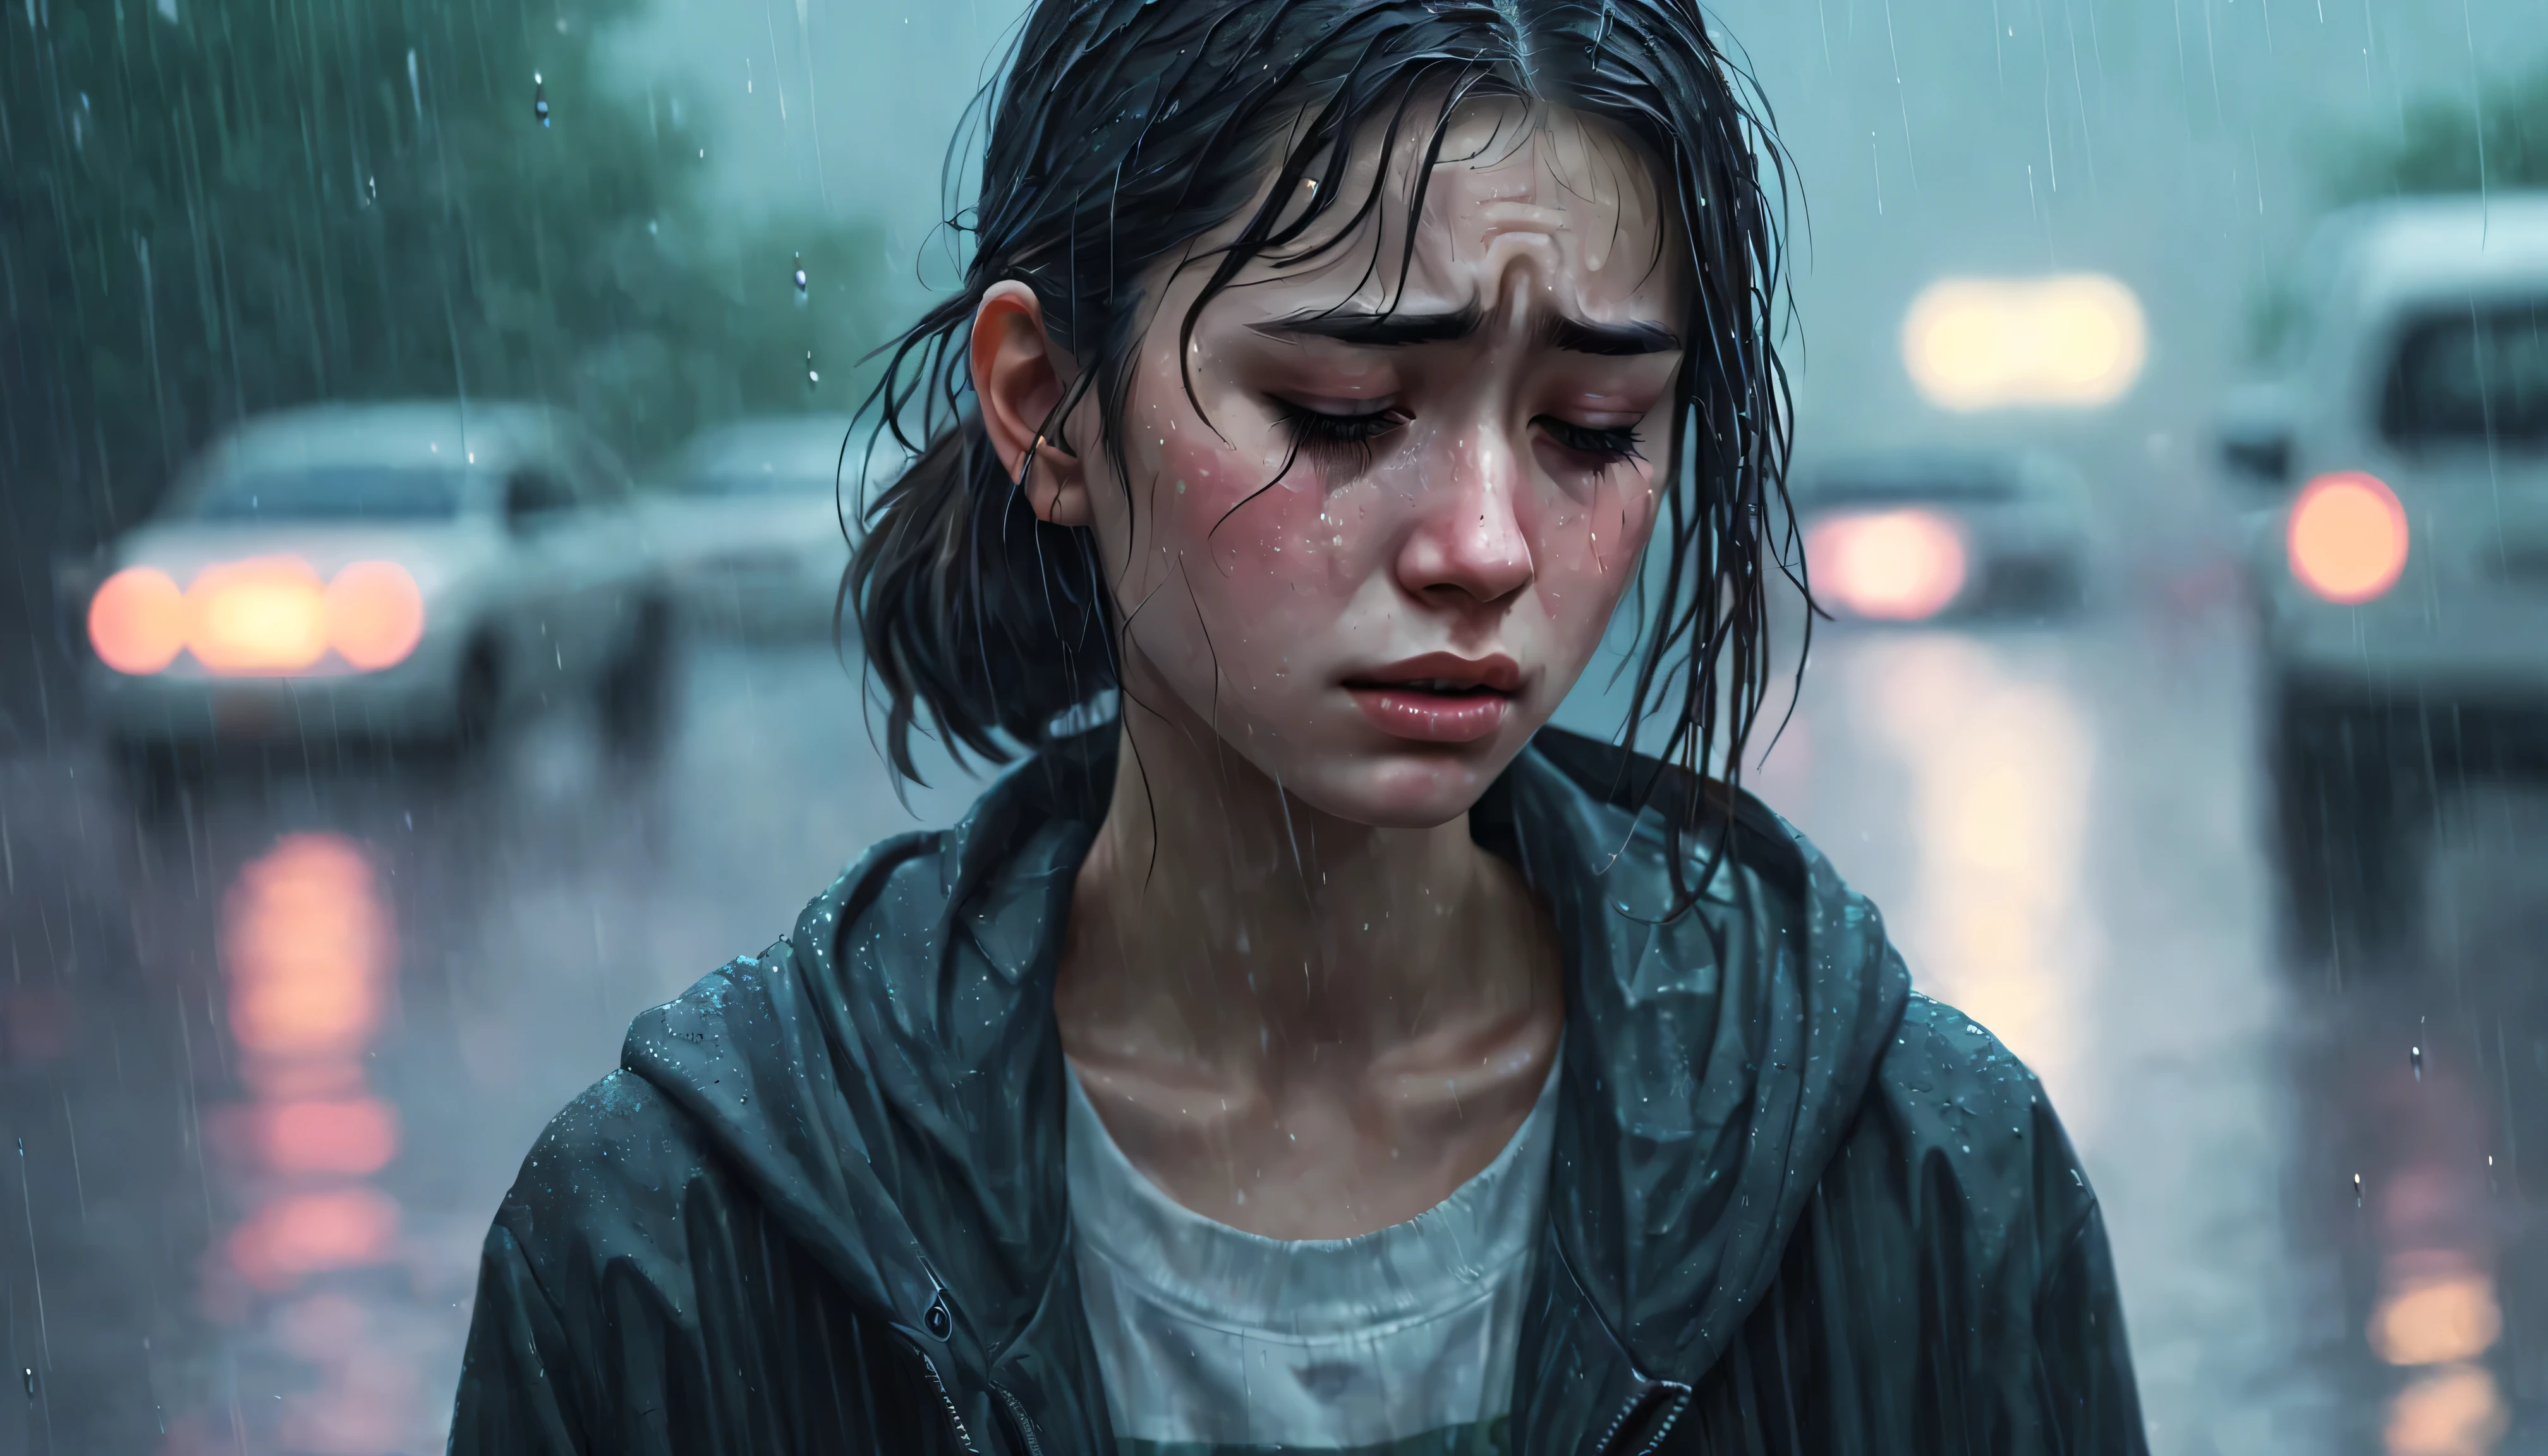 A girl cries in the melancholy rain, Scene, depicted in dreamlike lo-fi style on ArtStation. Her tear-stained face is beautifully captured., her sadness is palpable in soft drops, falling around her. The shades of rain create an atmosphere of bittersweet sadness, and the attention to detail in the girl’s facial expression is amazing.. This emotionally charged image evokes a sense of empathy and introspection.., demonstration of the author&#39;s skill and artistry.
